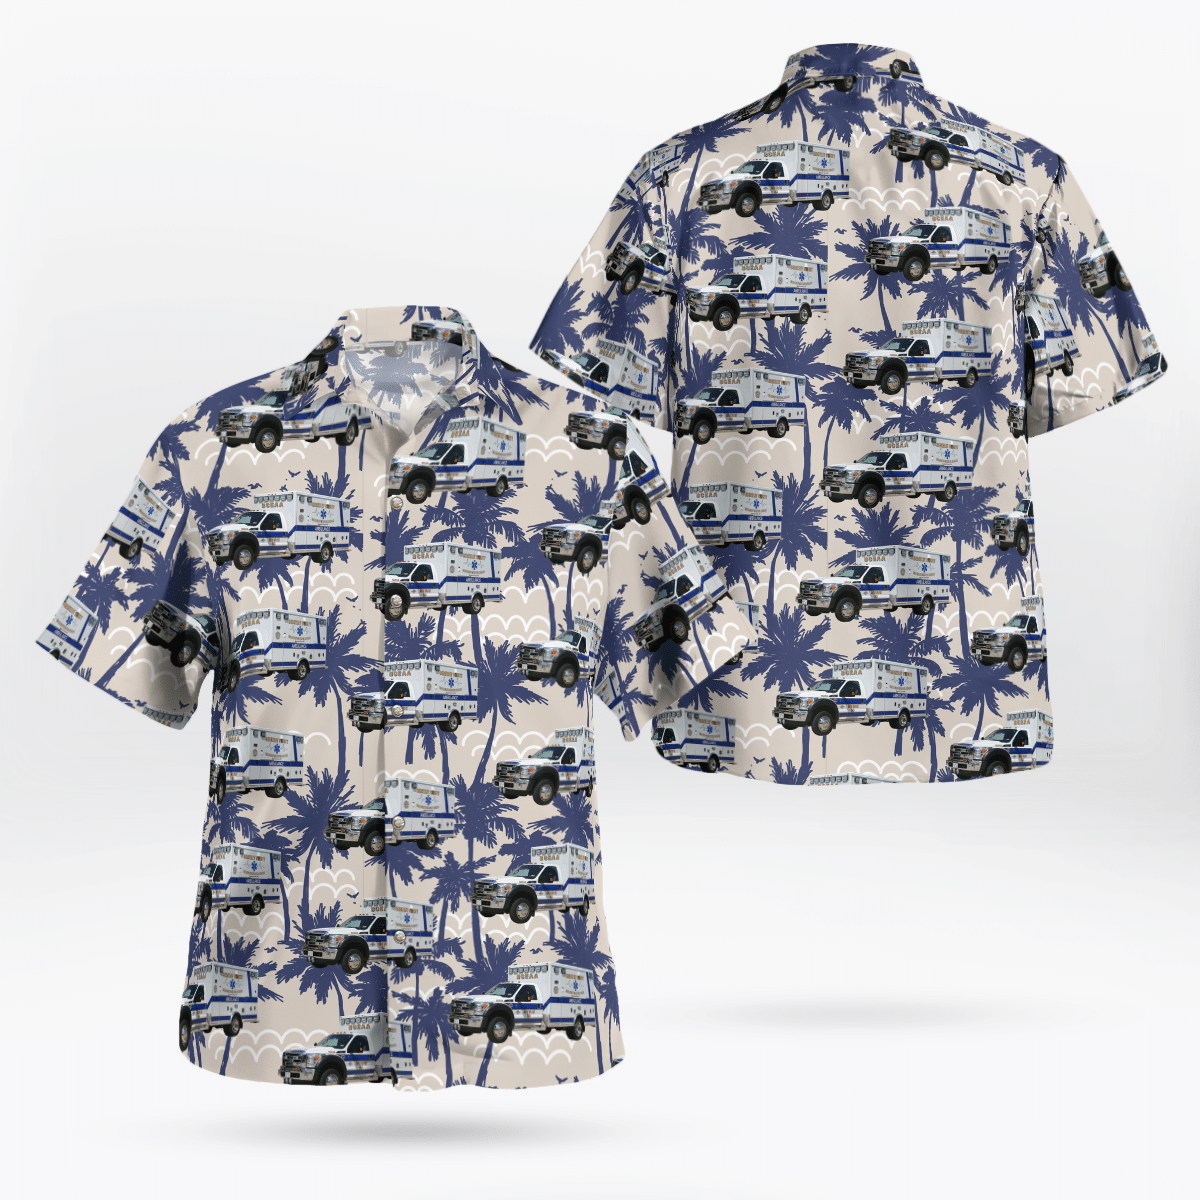 If you are in need of a new summertime look, pick up this Hawaiian shirt 5